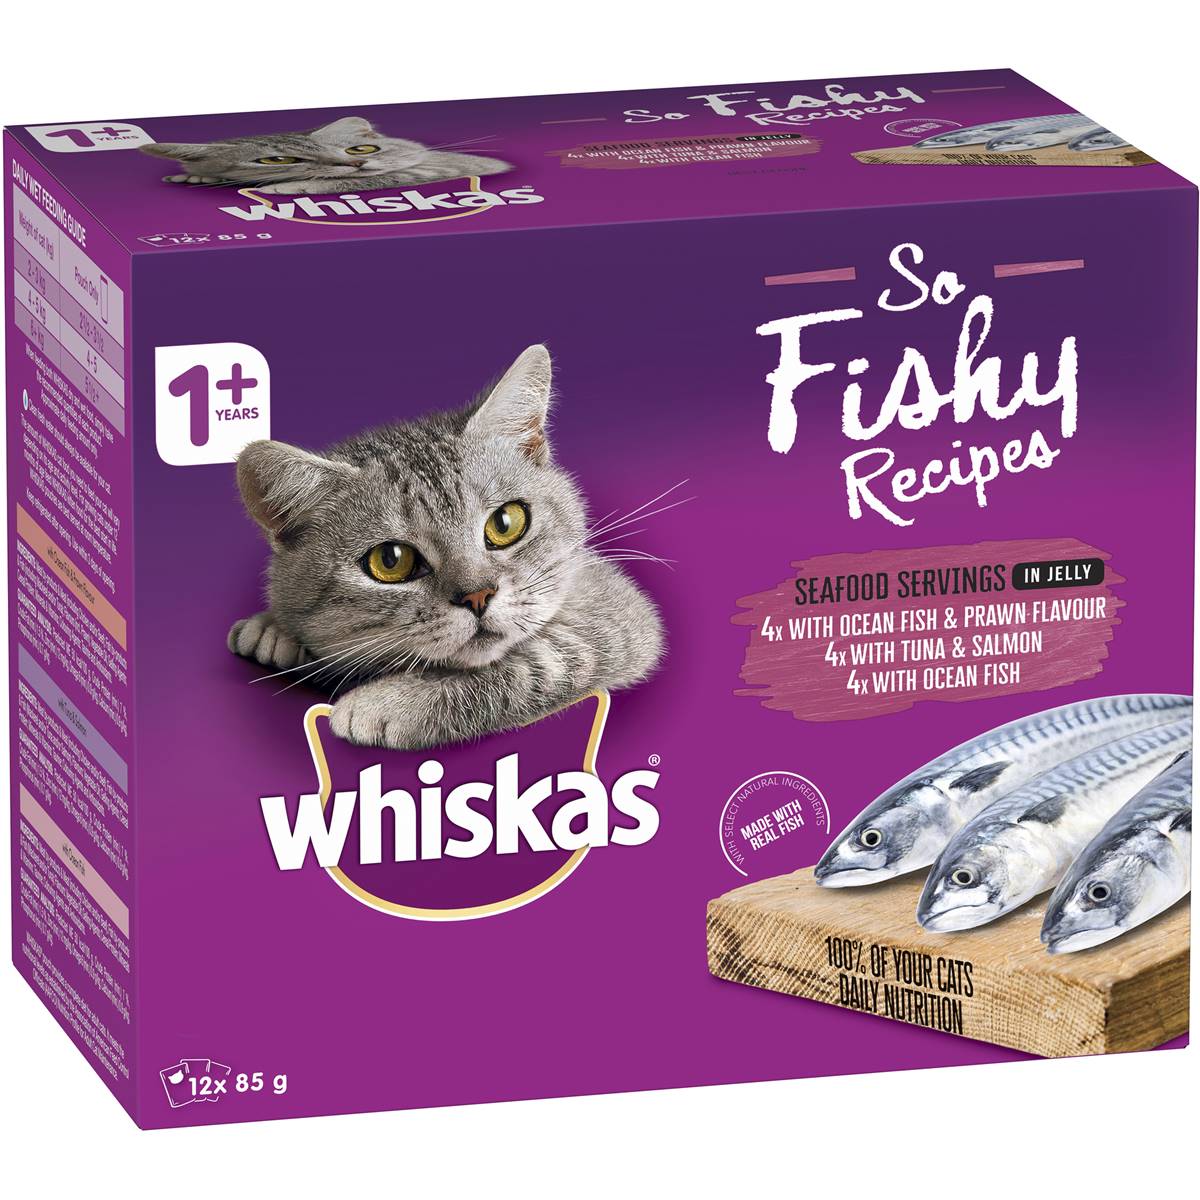 Whiskas Oh So Fishy 1+ Years Wet Cat Food Seafood 12x85g